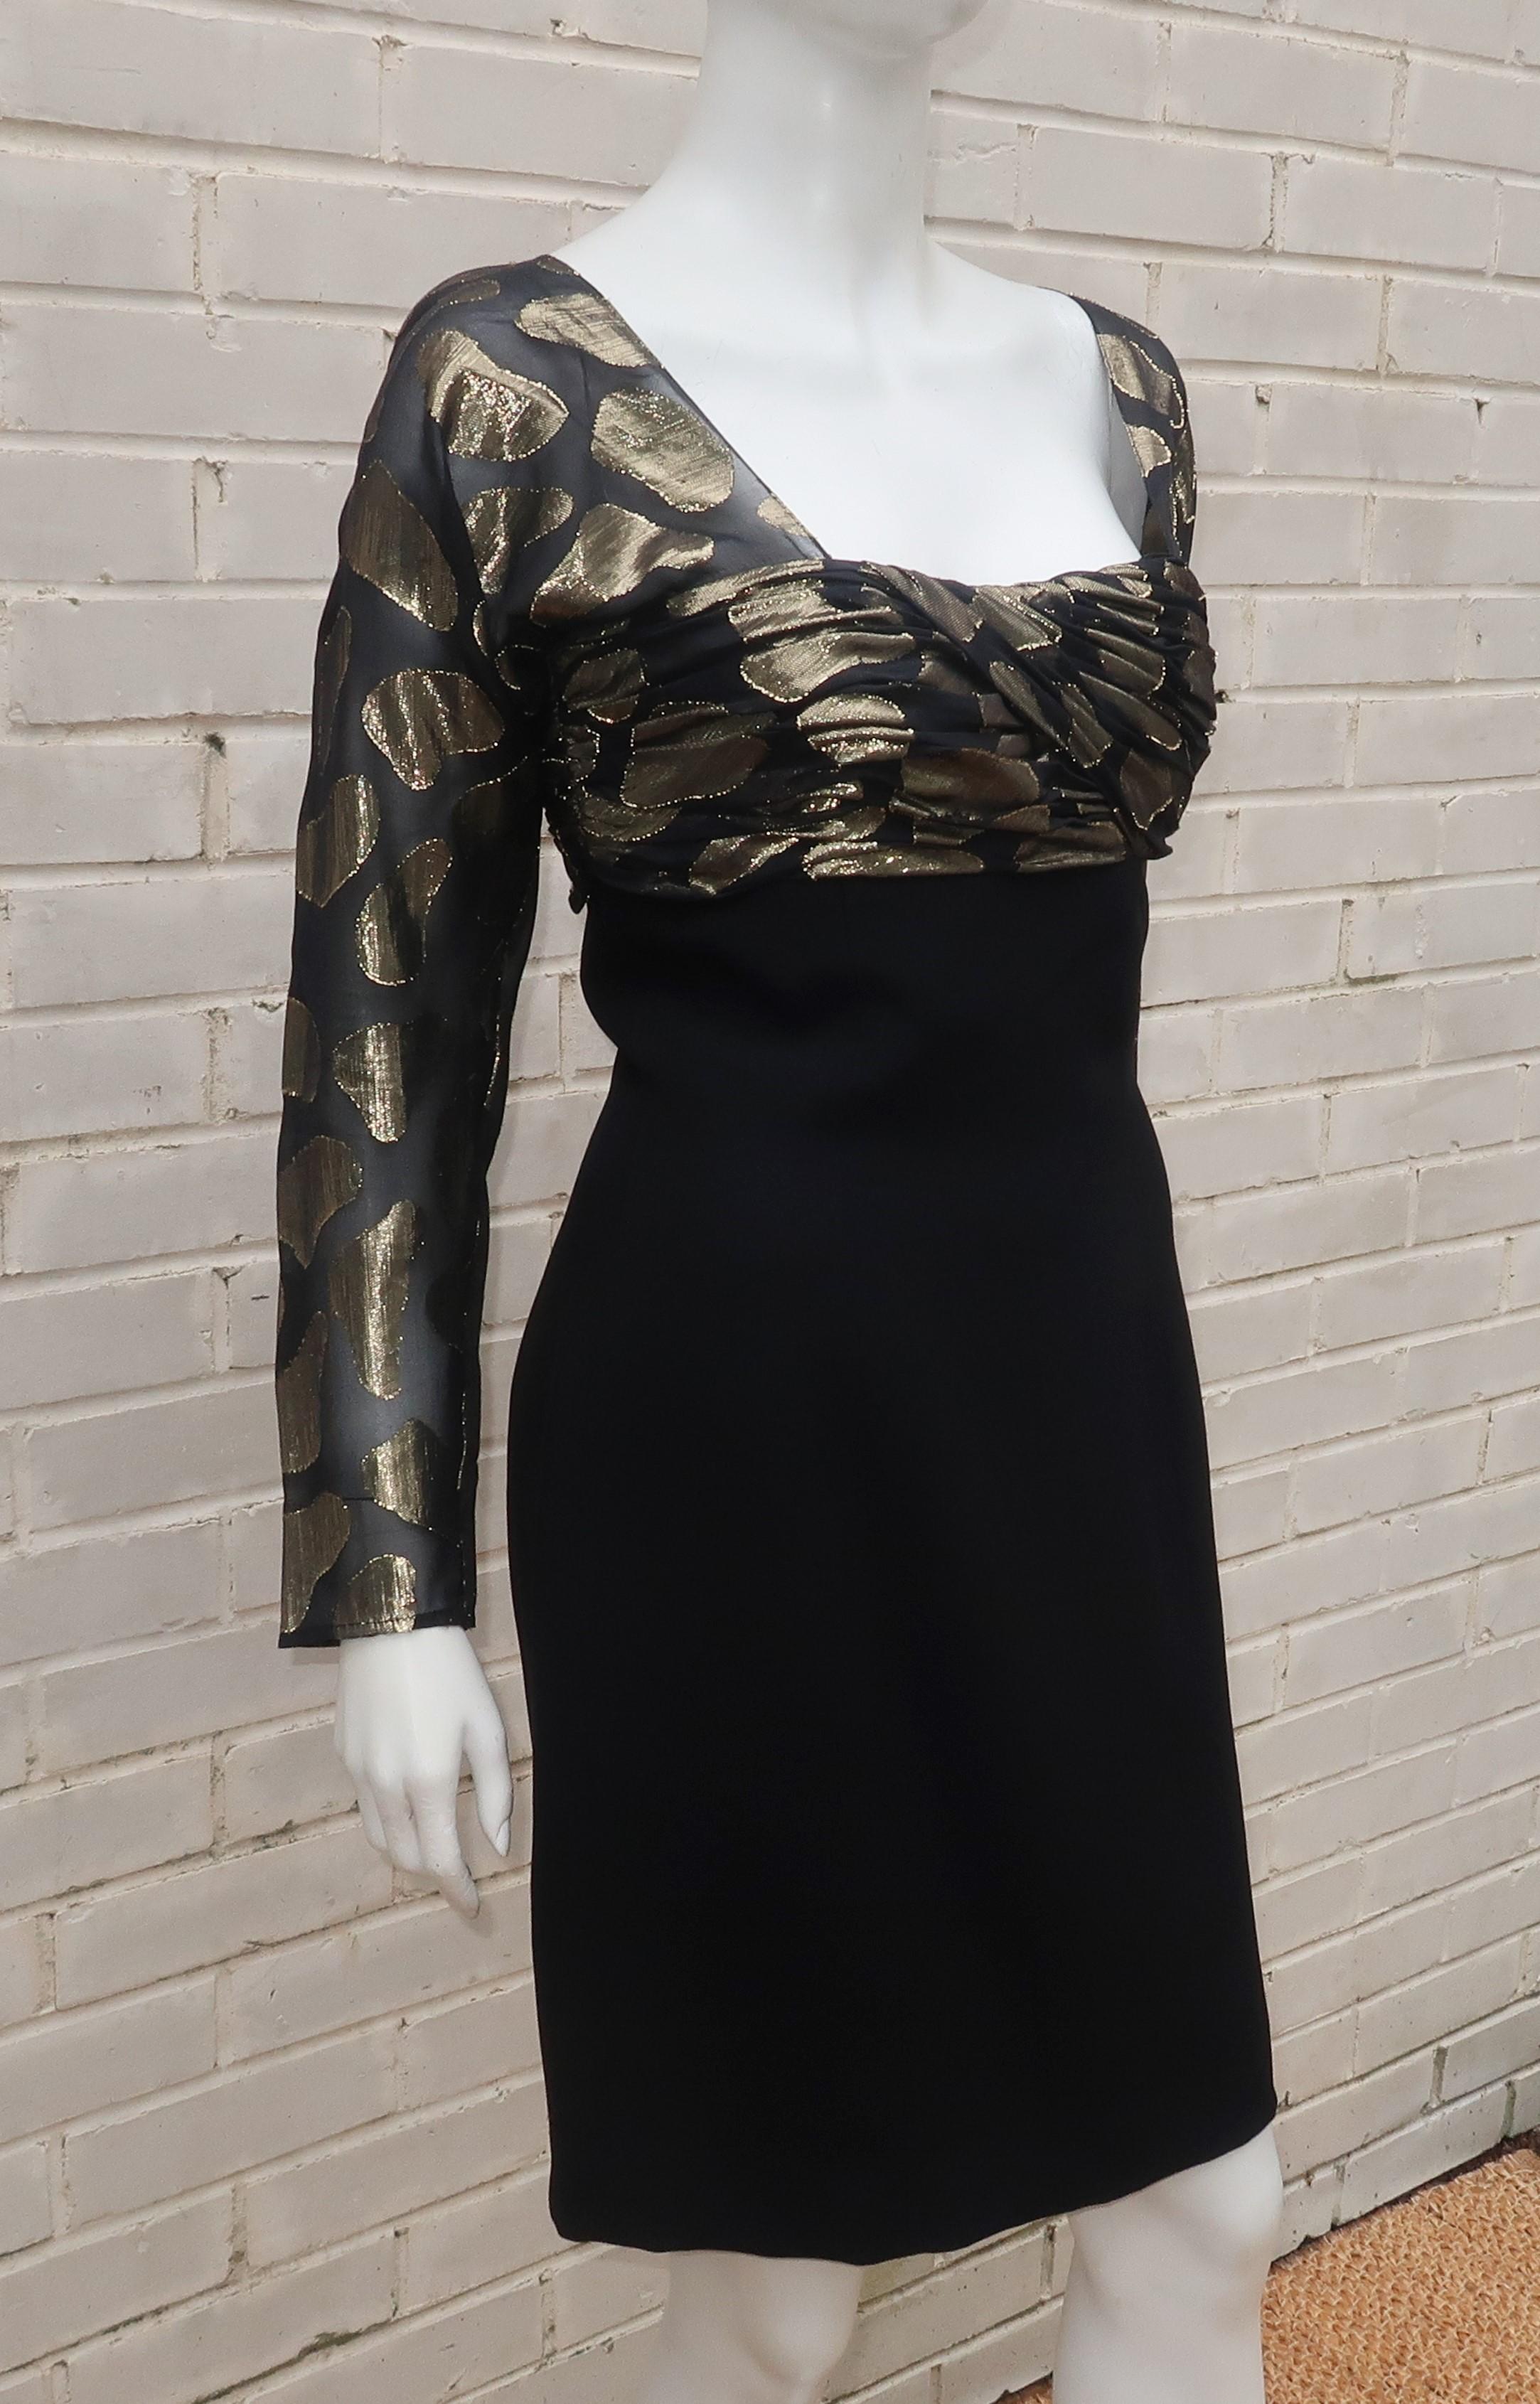 Snooty Hooty Black Crepe & Gold Lamé Cocktail Dress, C.1980 In Good Condition For Sale In Atlanta, GA